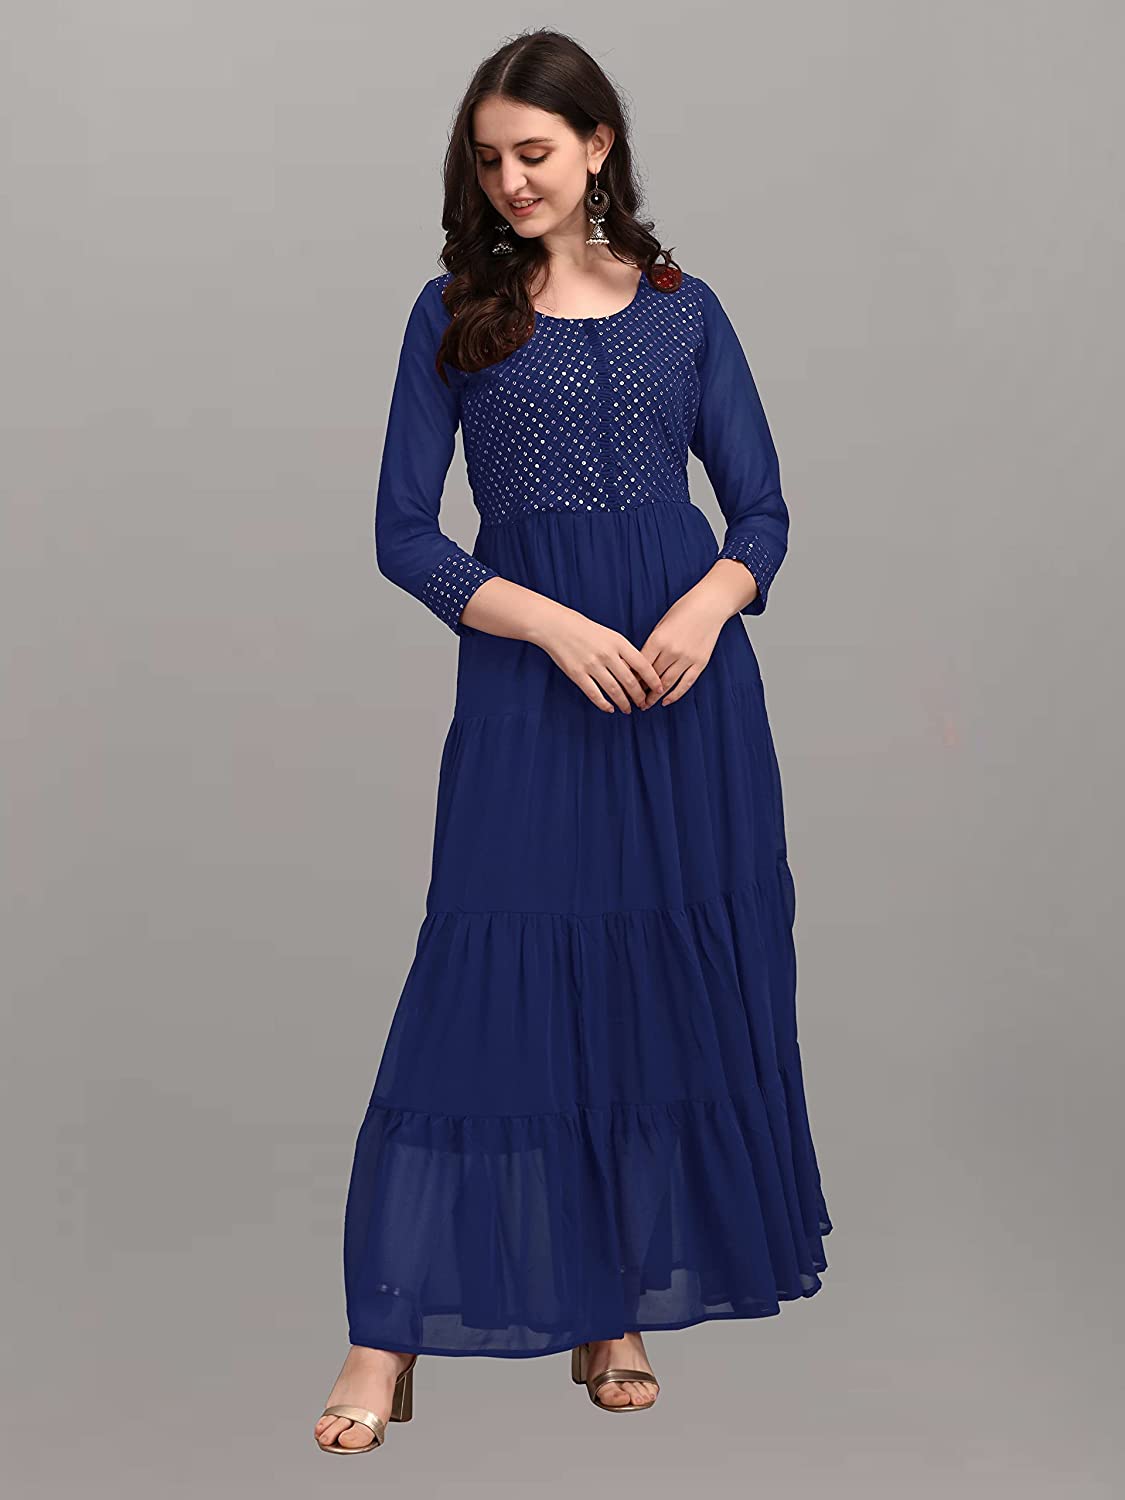 FIBREZA Women's Georgette Traditional Ethnic Long Sequins Embroidered Gown Western Dress with Round Neck -  DRESSES in Sri Lanka from Arcade Online Shopping - Just Rs. 6299!